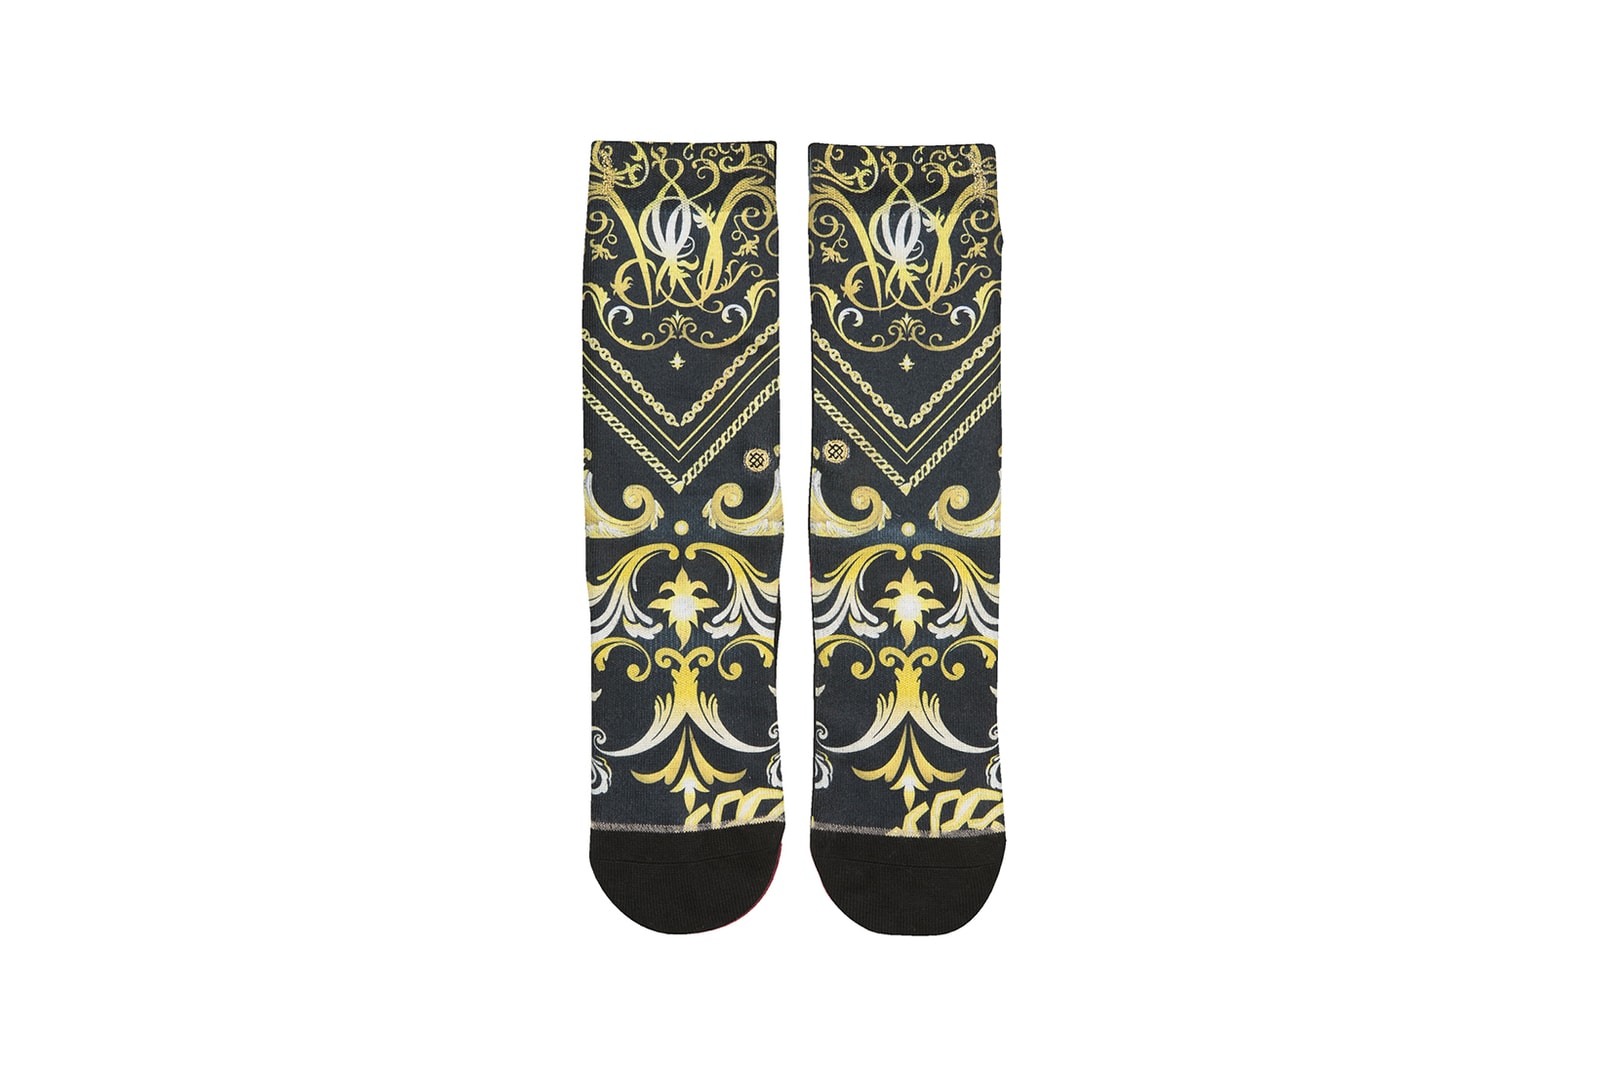 Disney's Beauty and the Beast x Stance Collection